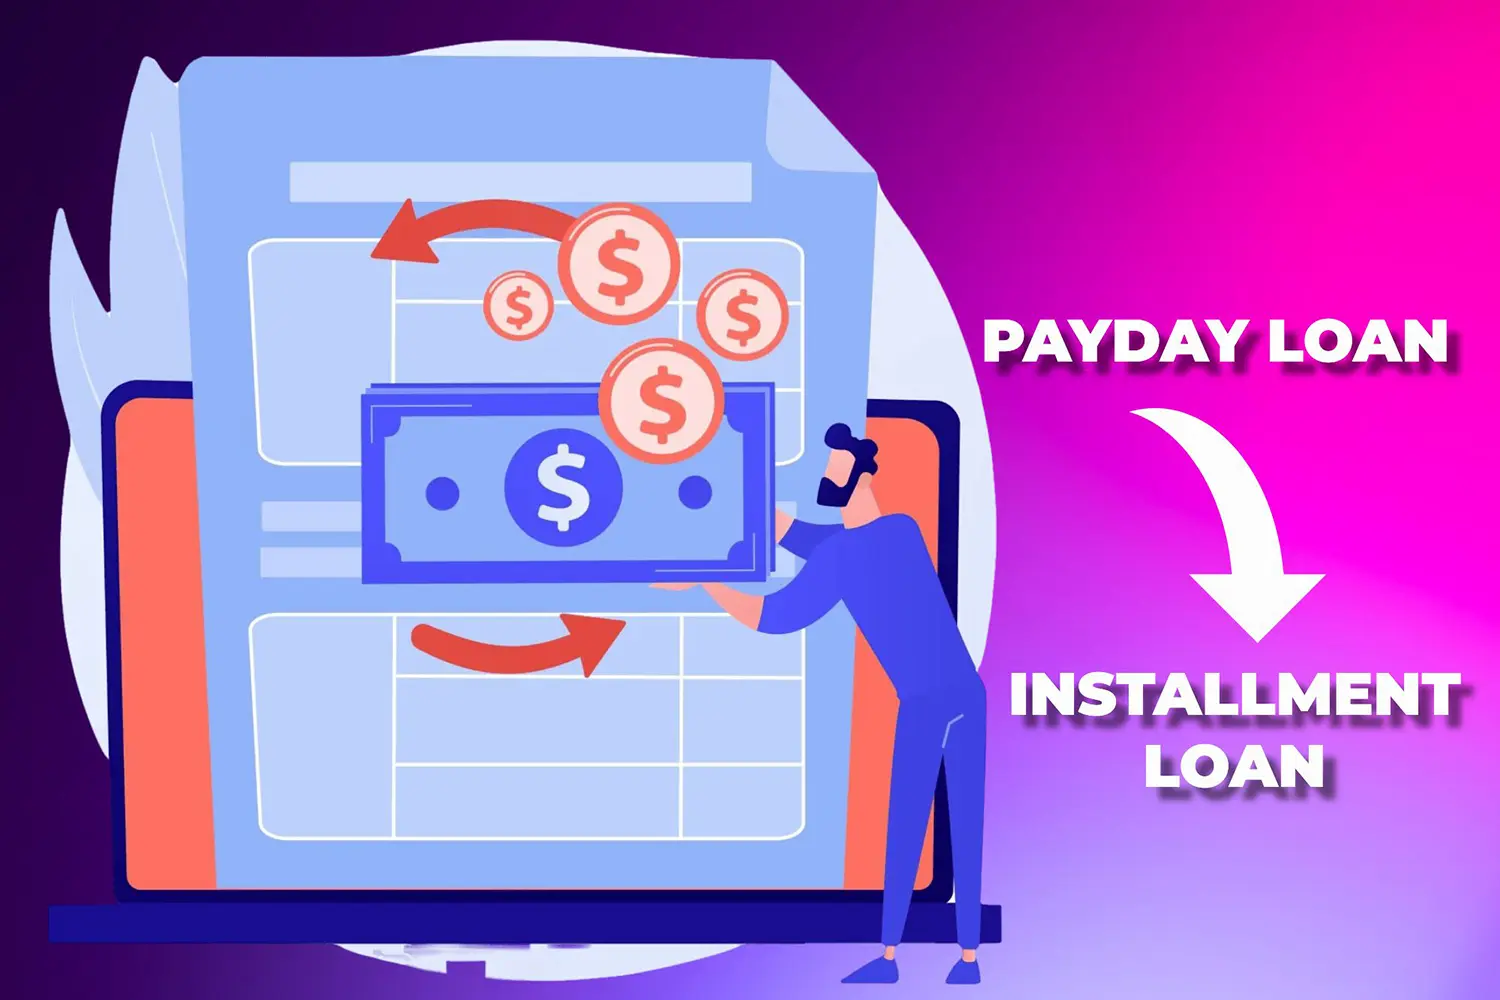 How to convert a payday loan to an installment loan